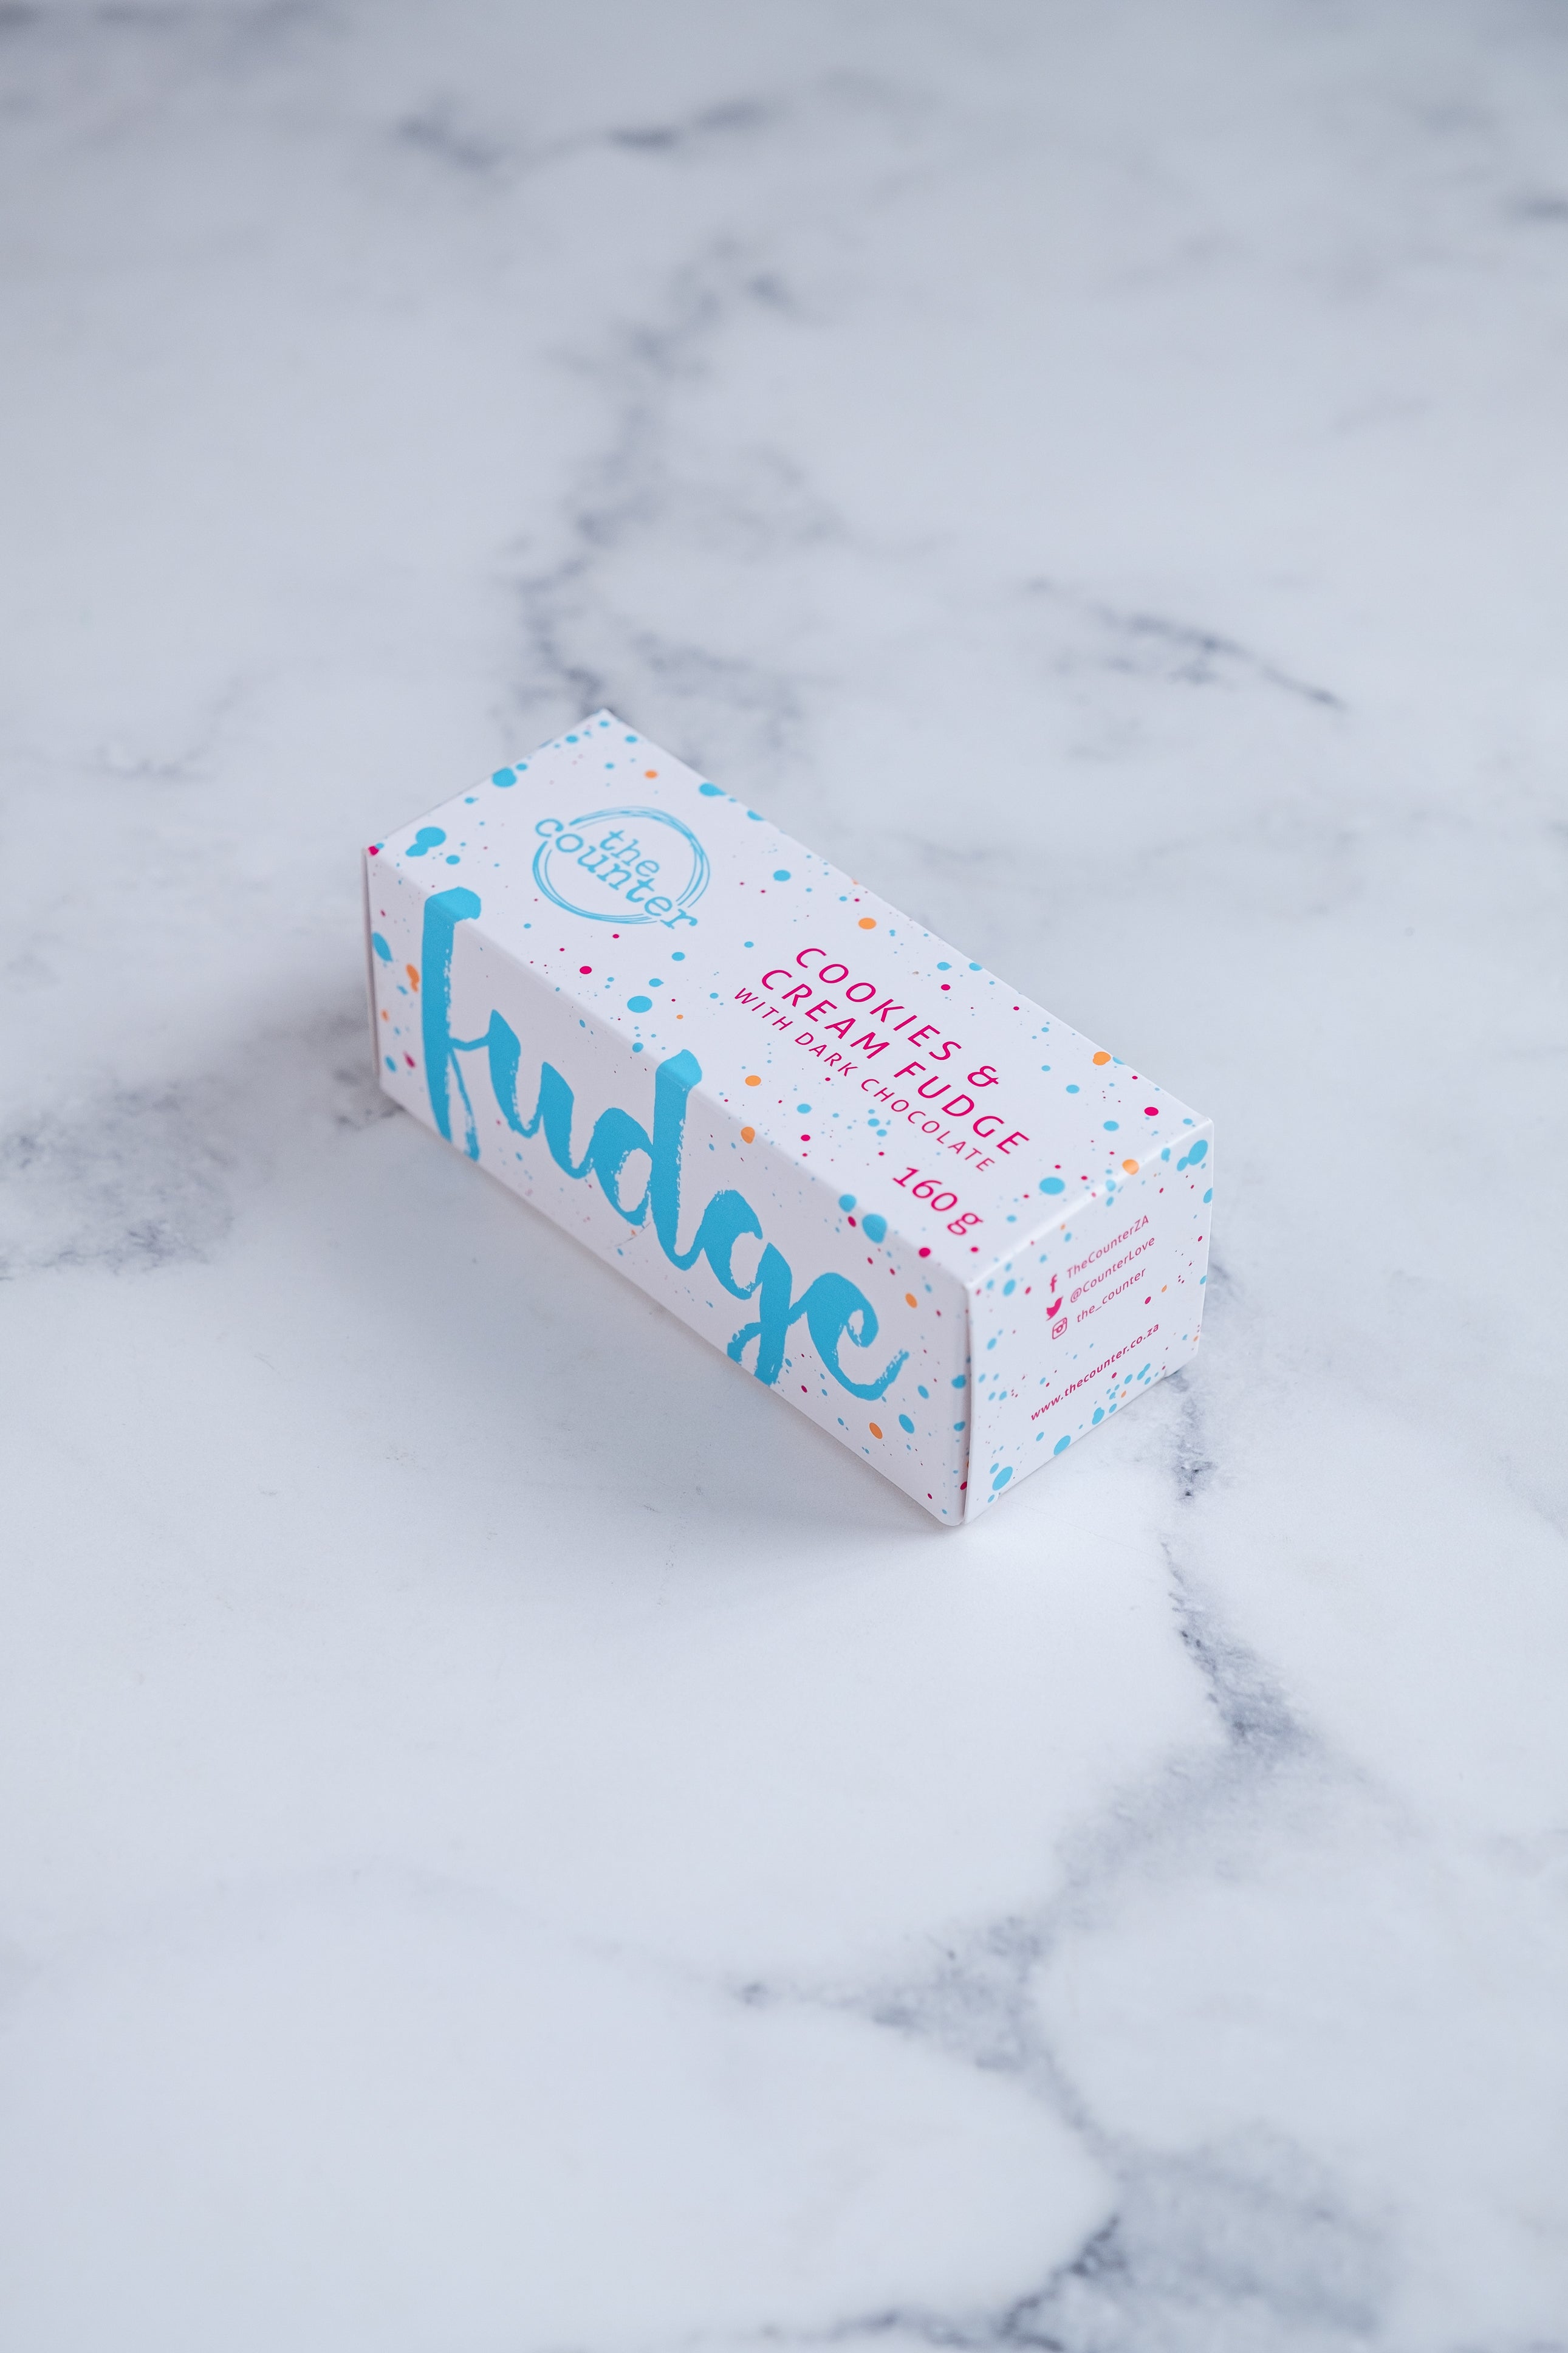 A white box sits on a neutral background. Large bright blue lettering states 'fudge' and is surrounded by bright blue and cerise pink paint splashes. A messy circled logo for The Counter and the words 'Cookies & Cream fudge with dark chocolate' are written in cerise pink block lettering.